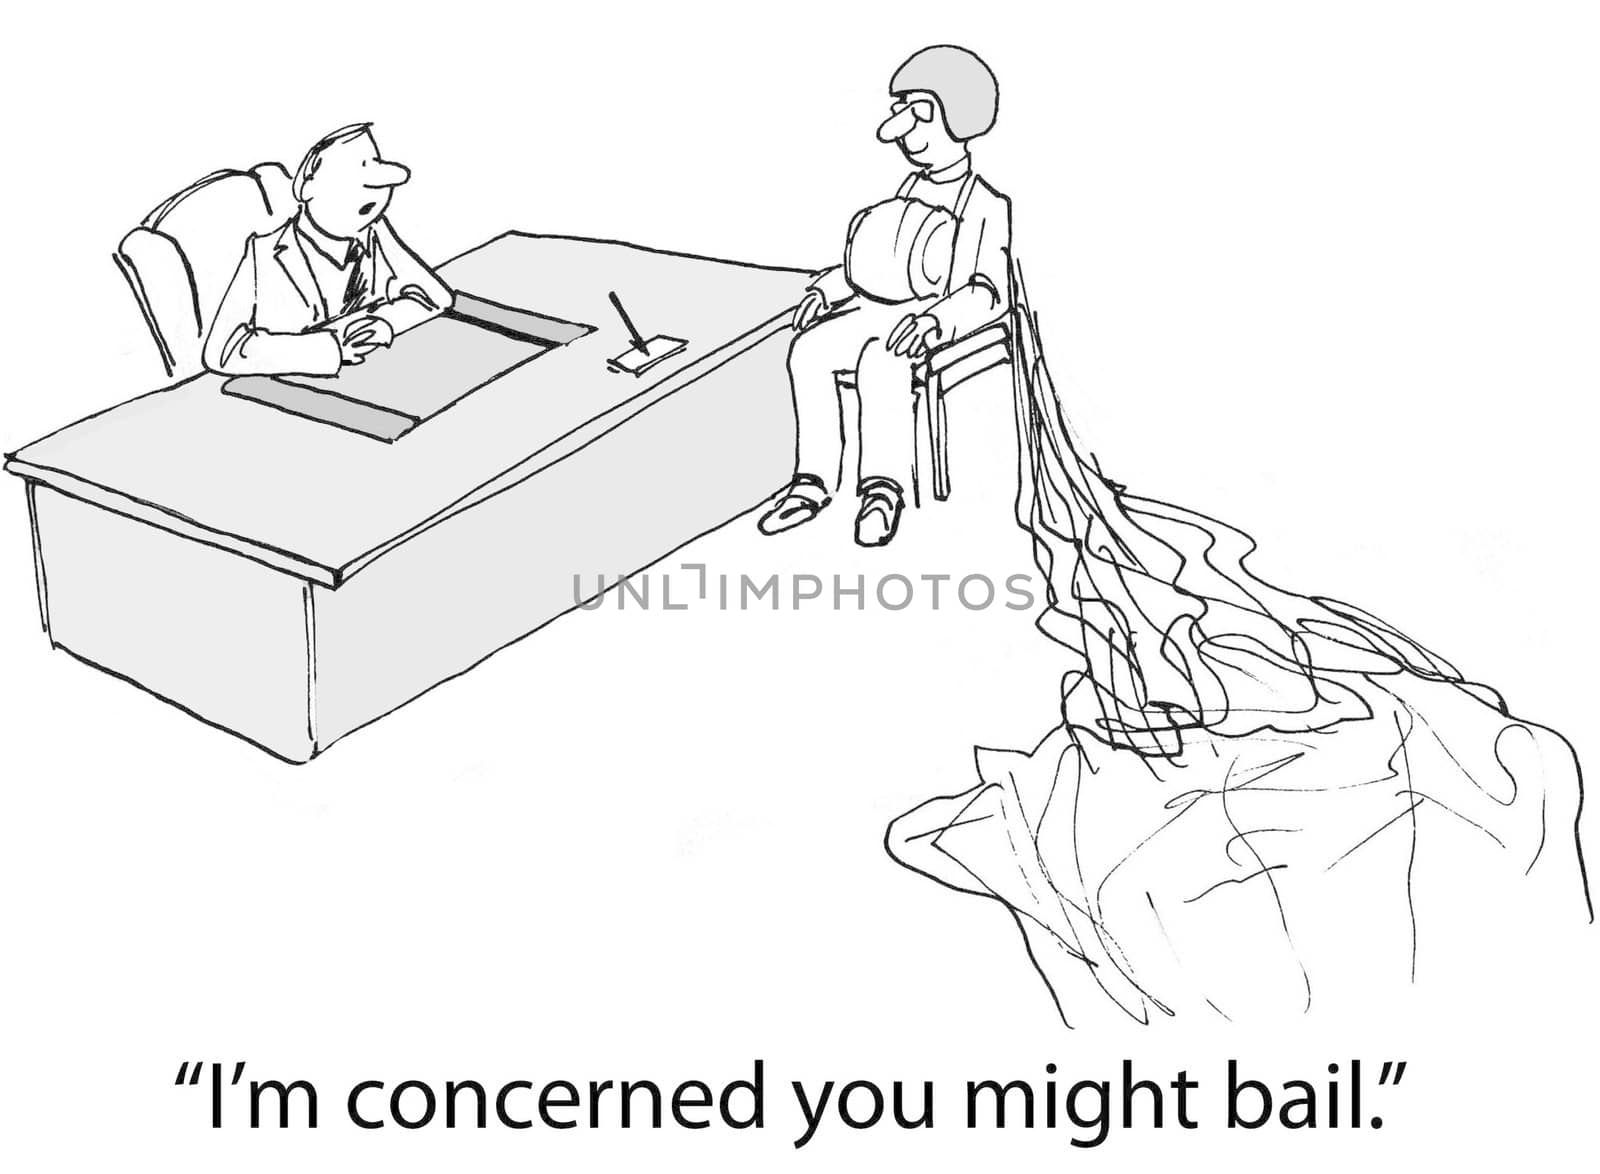 "I'm concerned you might bail."